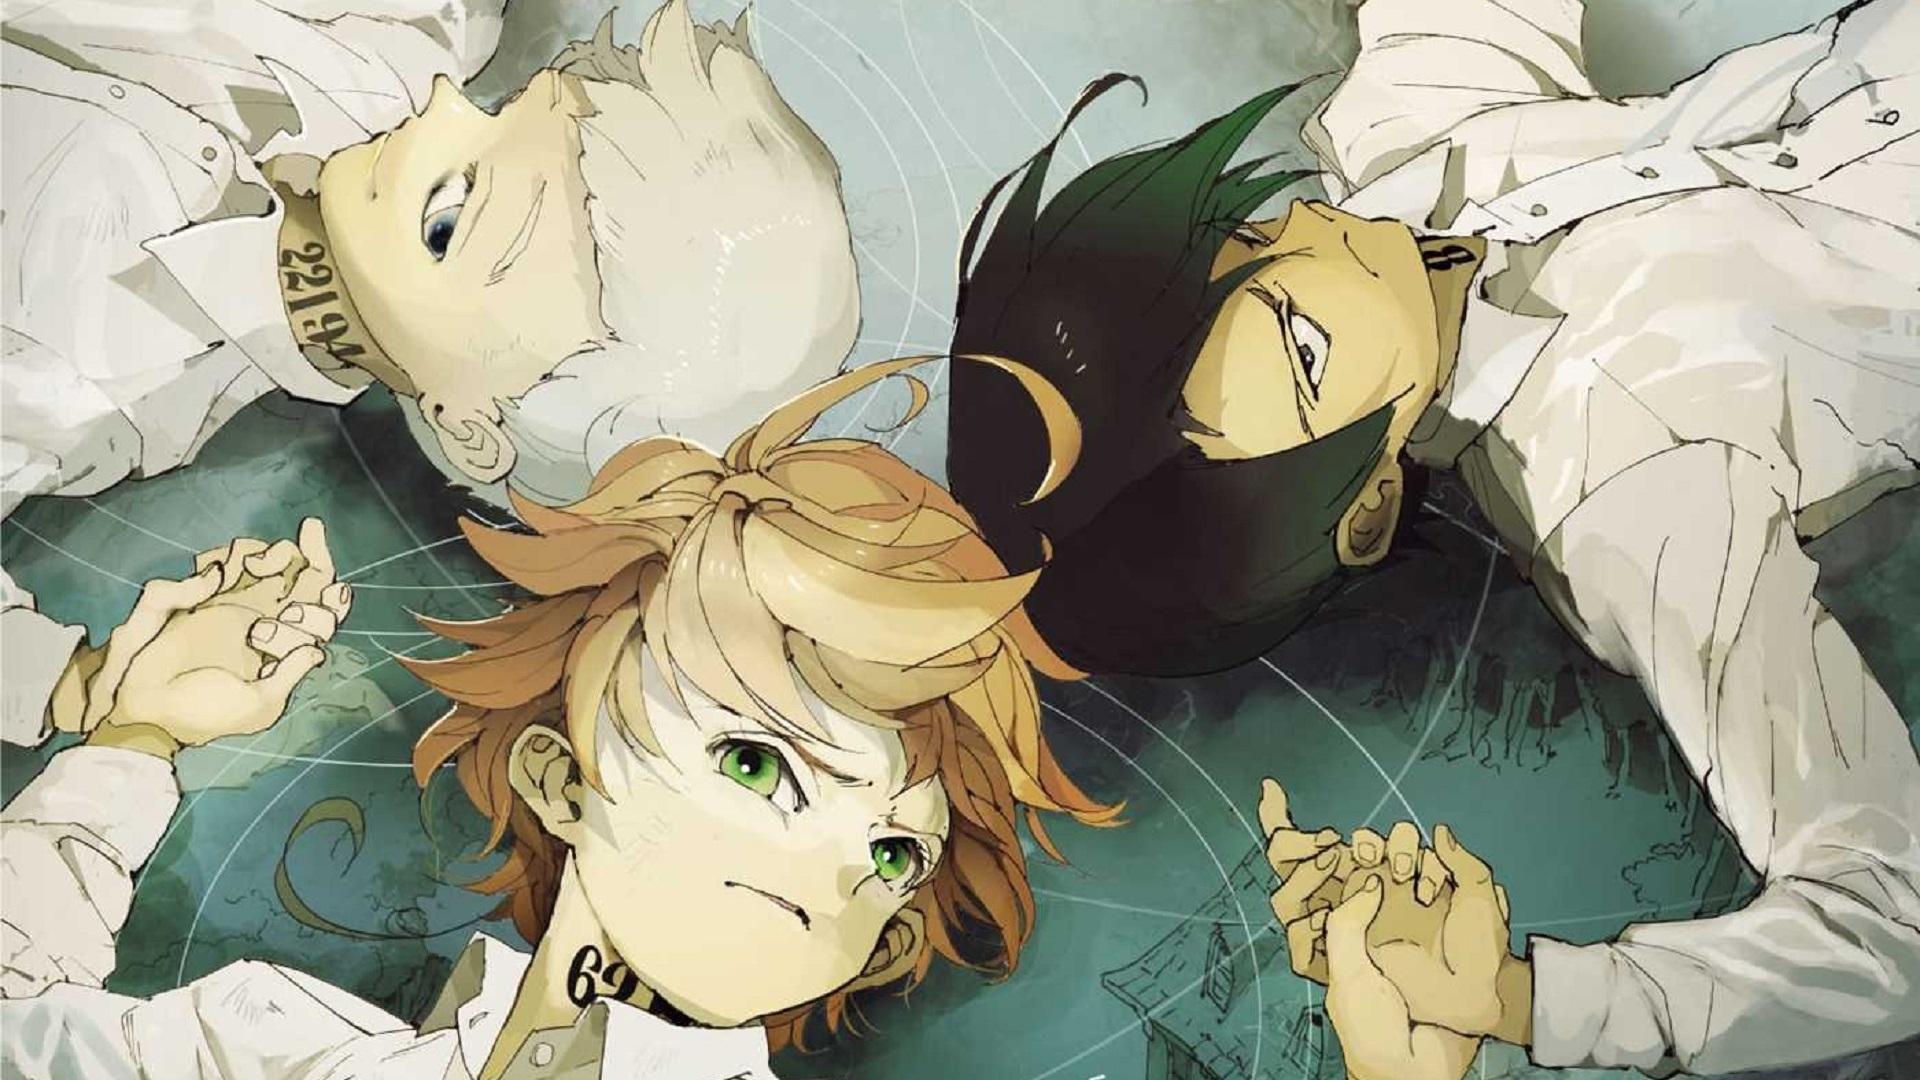 The Promised Neverland Wallpaper Free The Promised